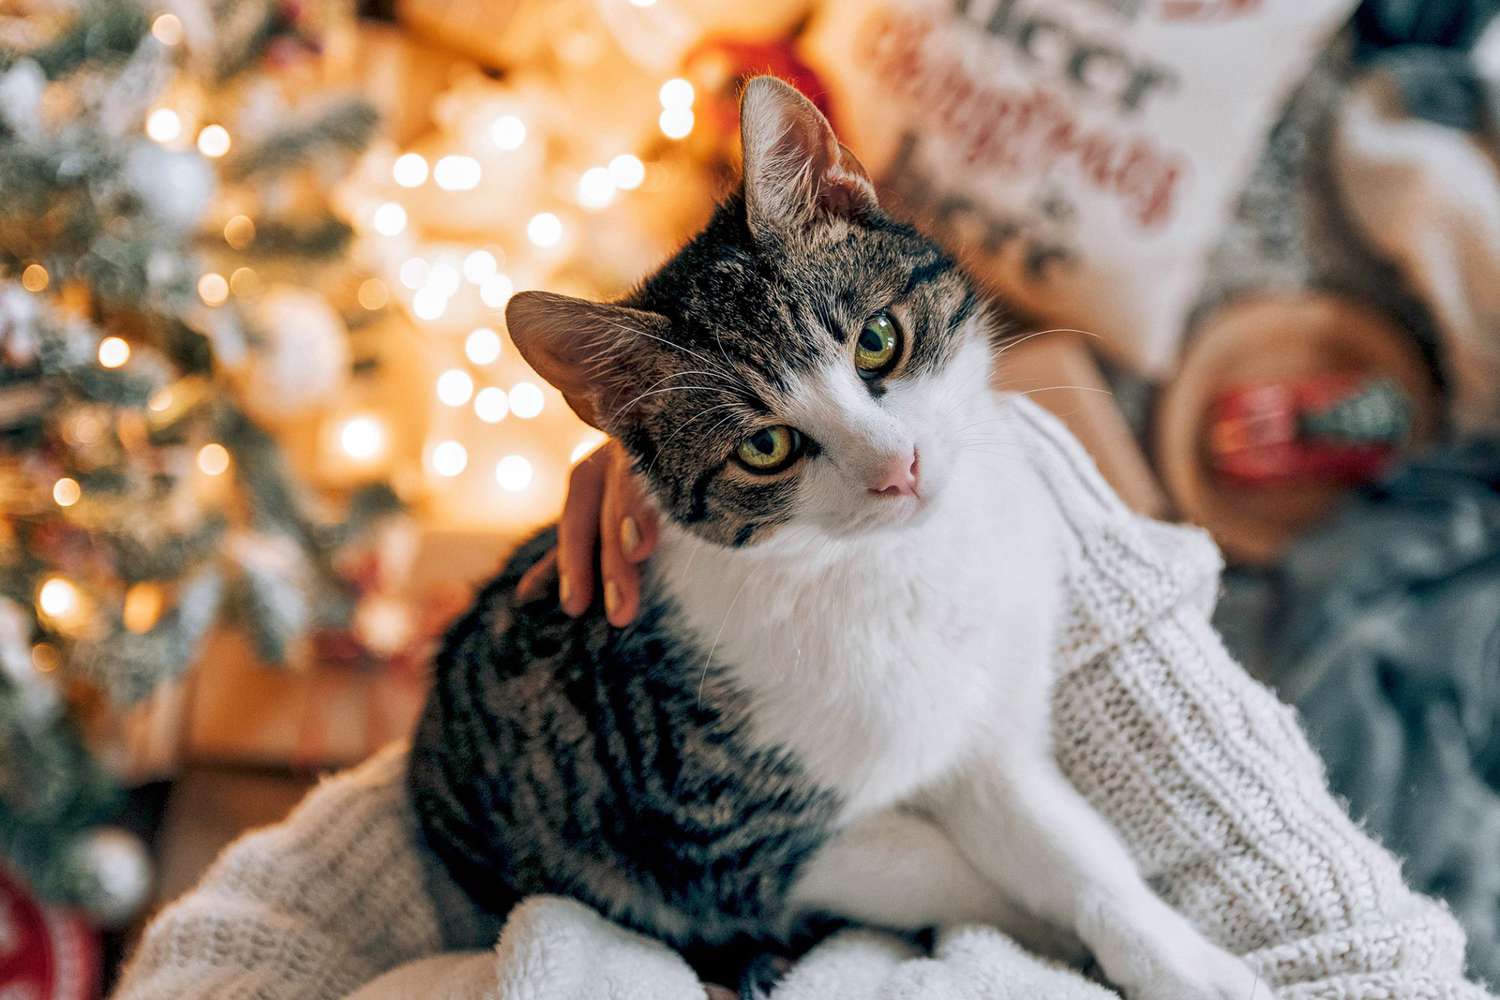 20 Cat Christmas Stockings That Are Too Cute Not To Get Your Kitty  Companion | Daily Paws